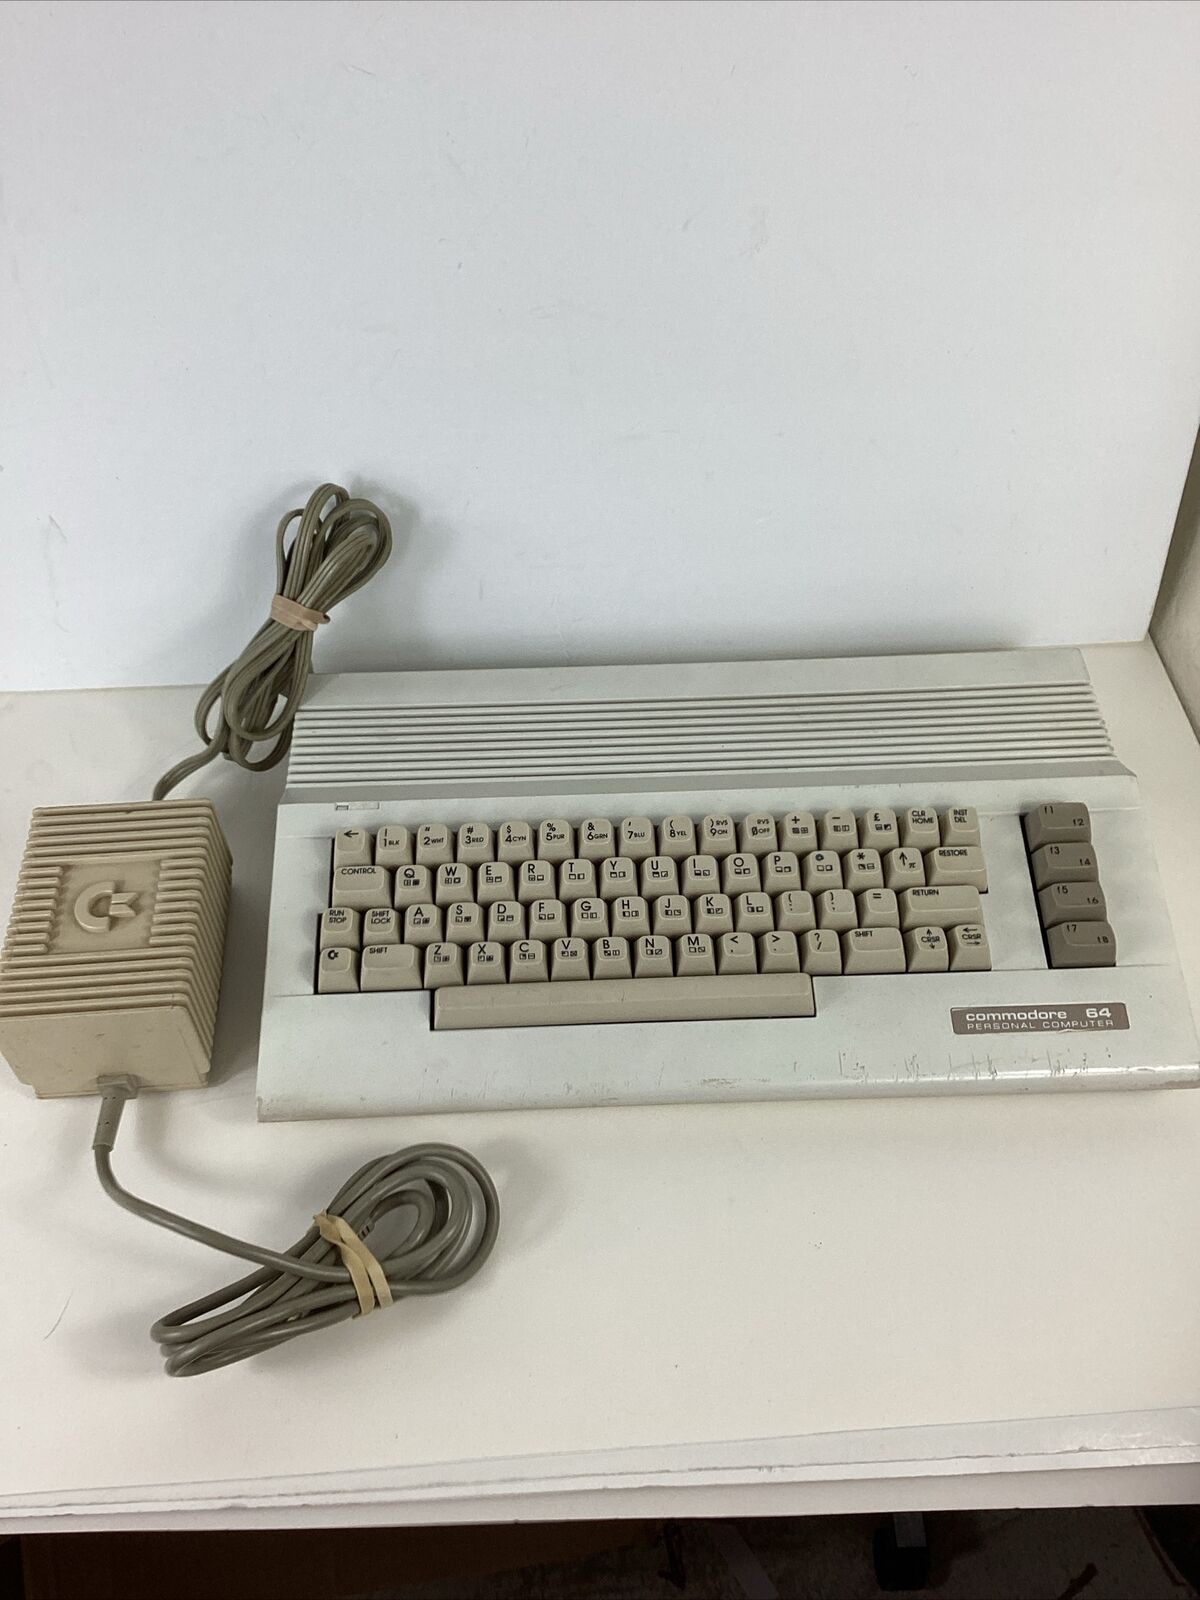 Vintage Commodore 64 Personal Computer Keyboard w/Power Supply *Powers On*